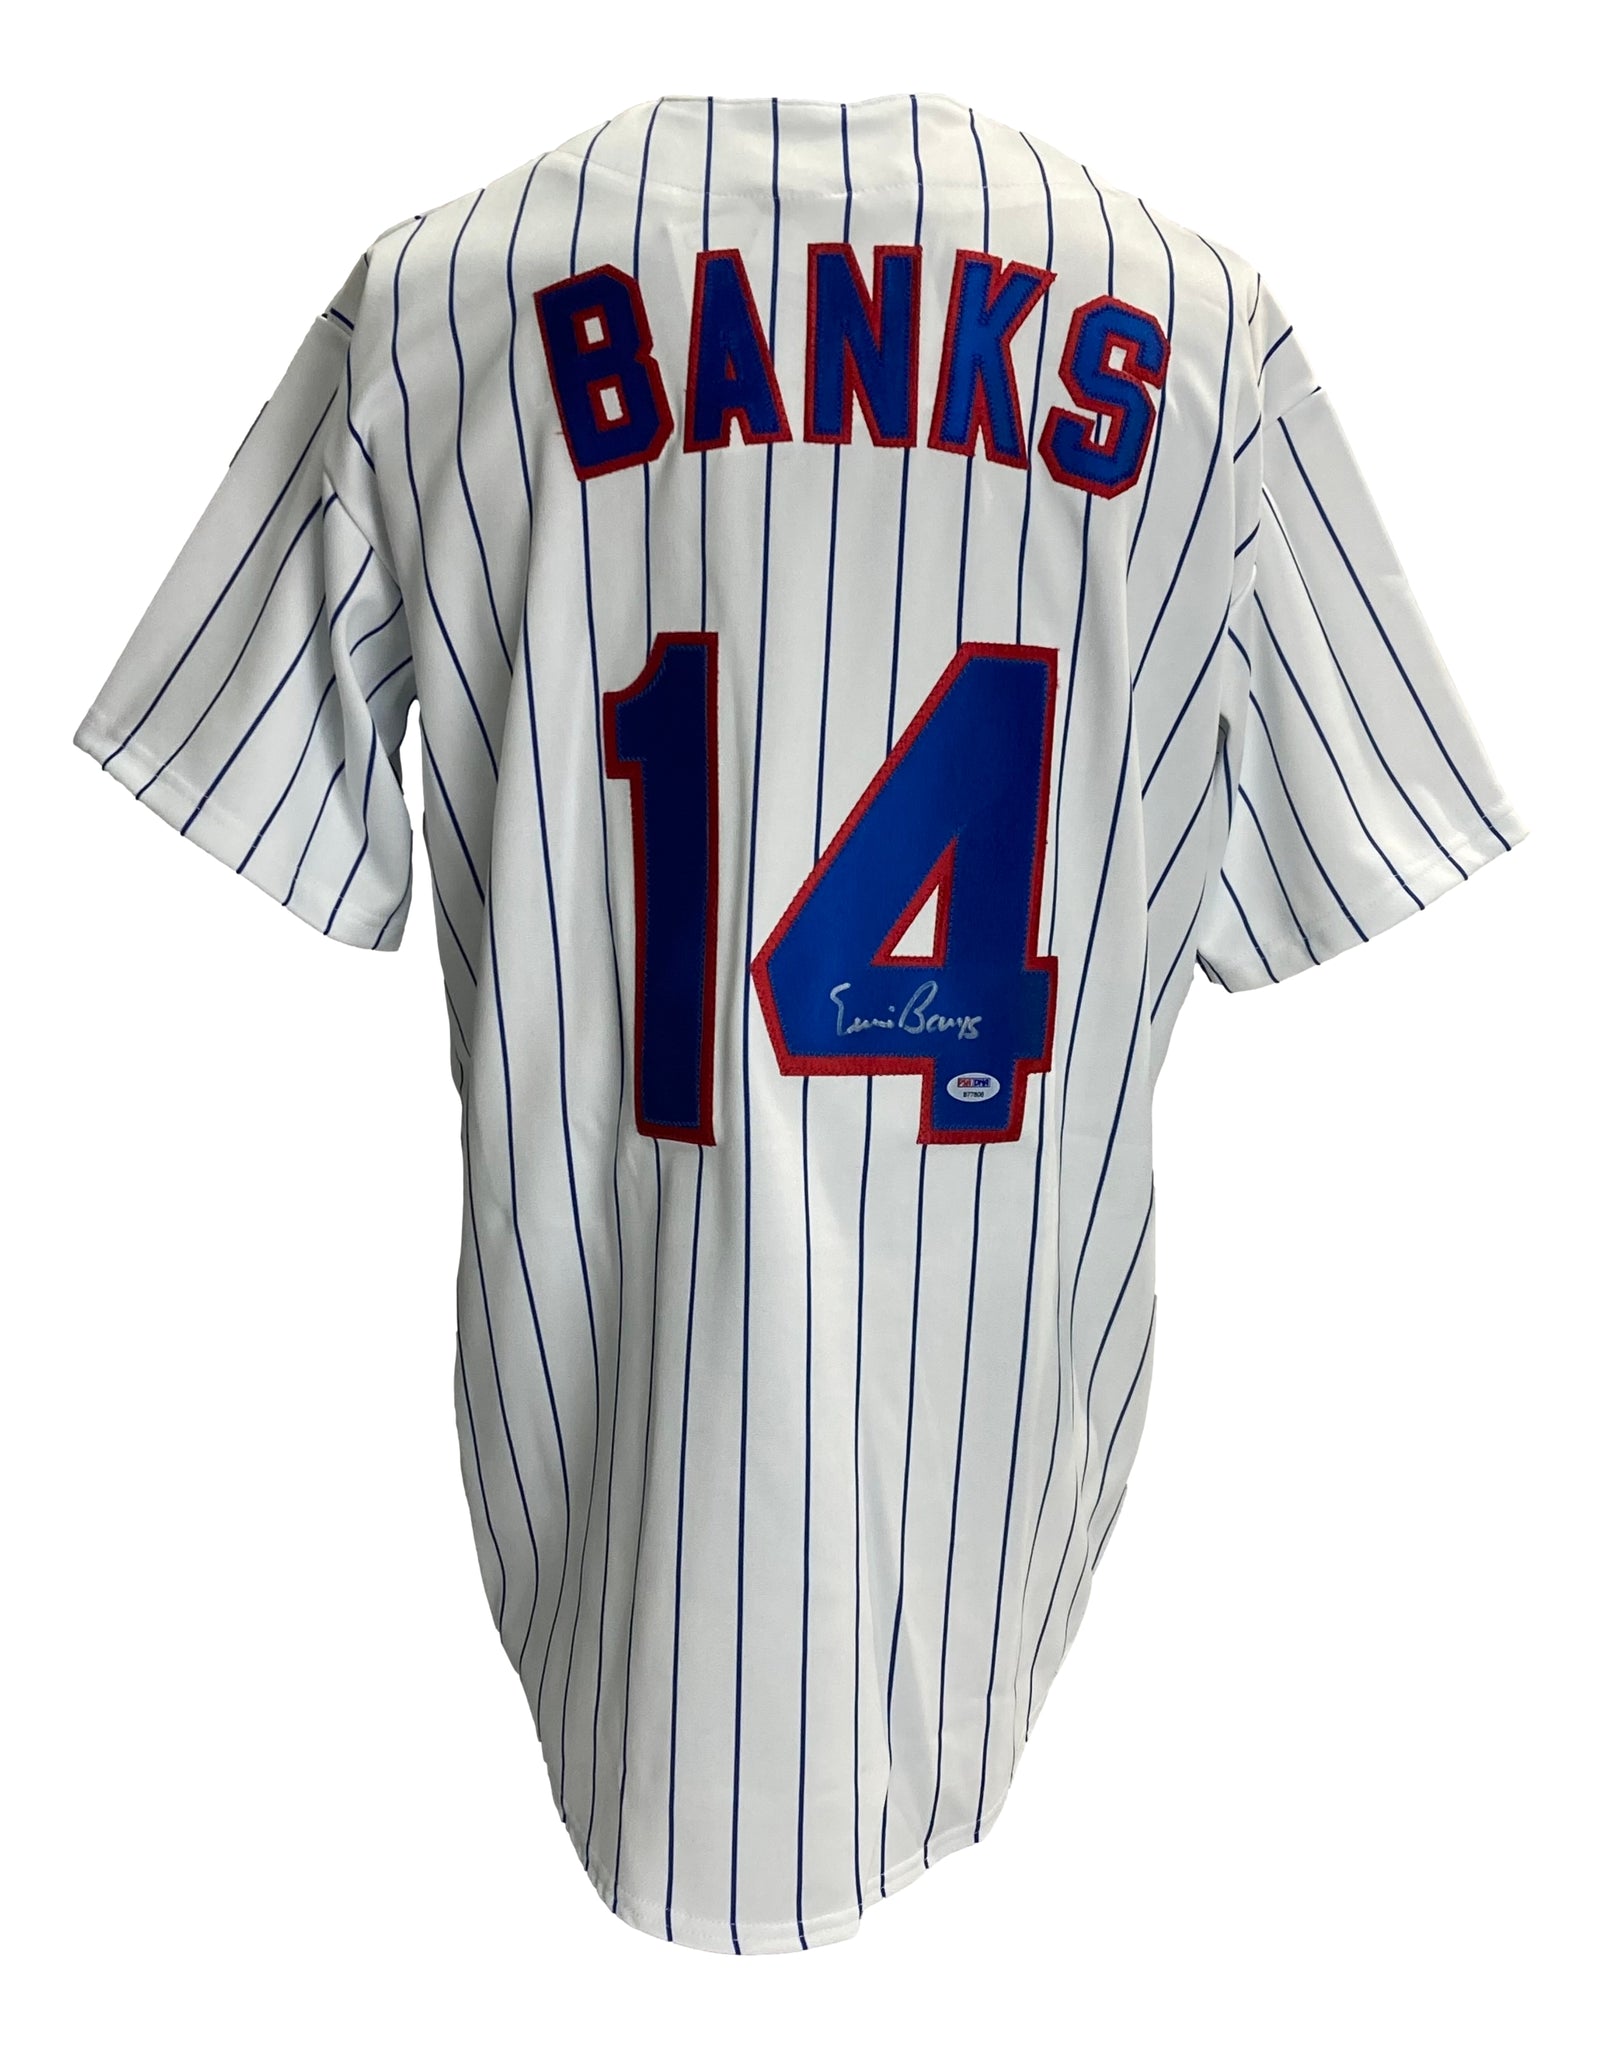 ERNIE BANKS  Chicago Cubs 1971 Home Majestic Throwback Baseball Jersey